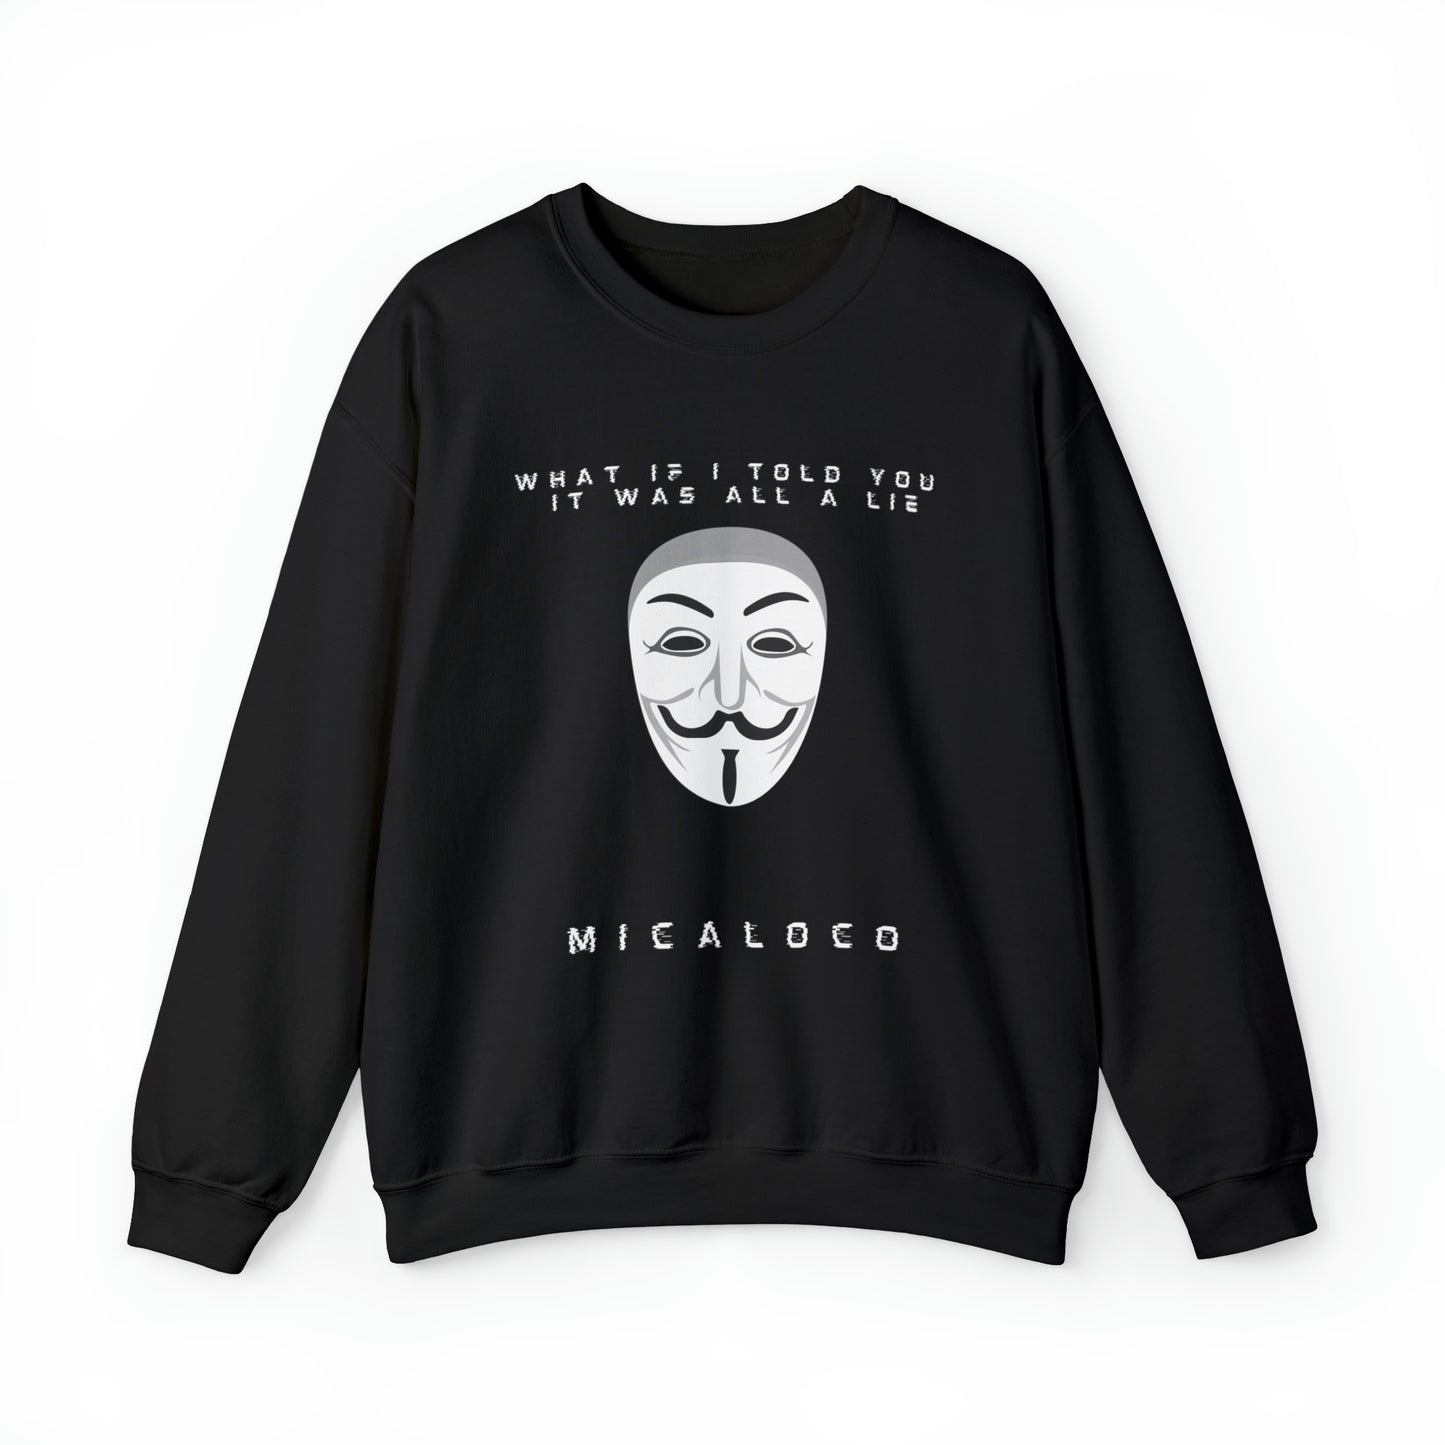 ALL A LIE (ANONYMOUS CONSPIRACY) CREWNECK